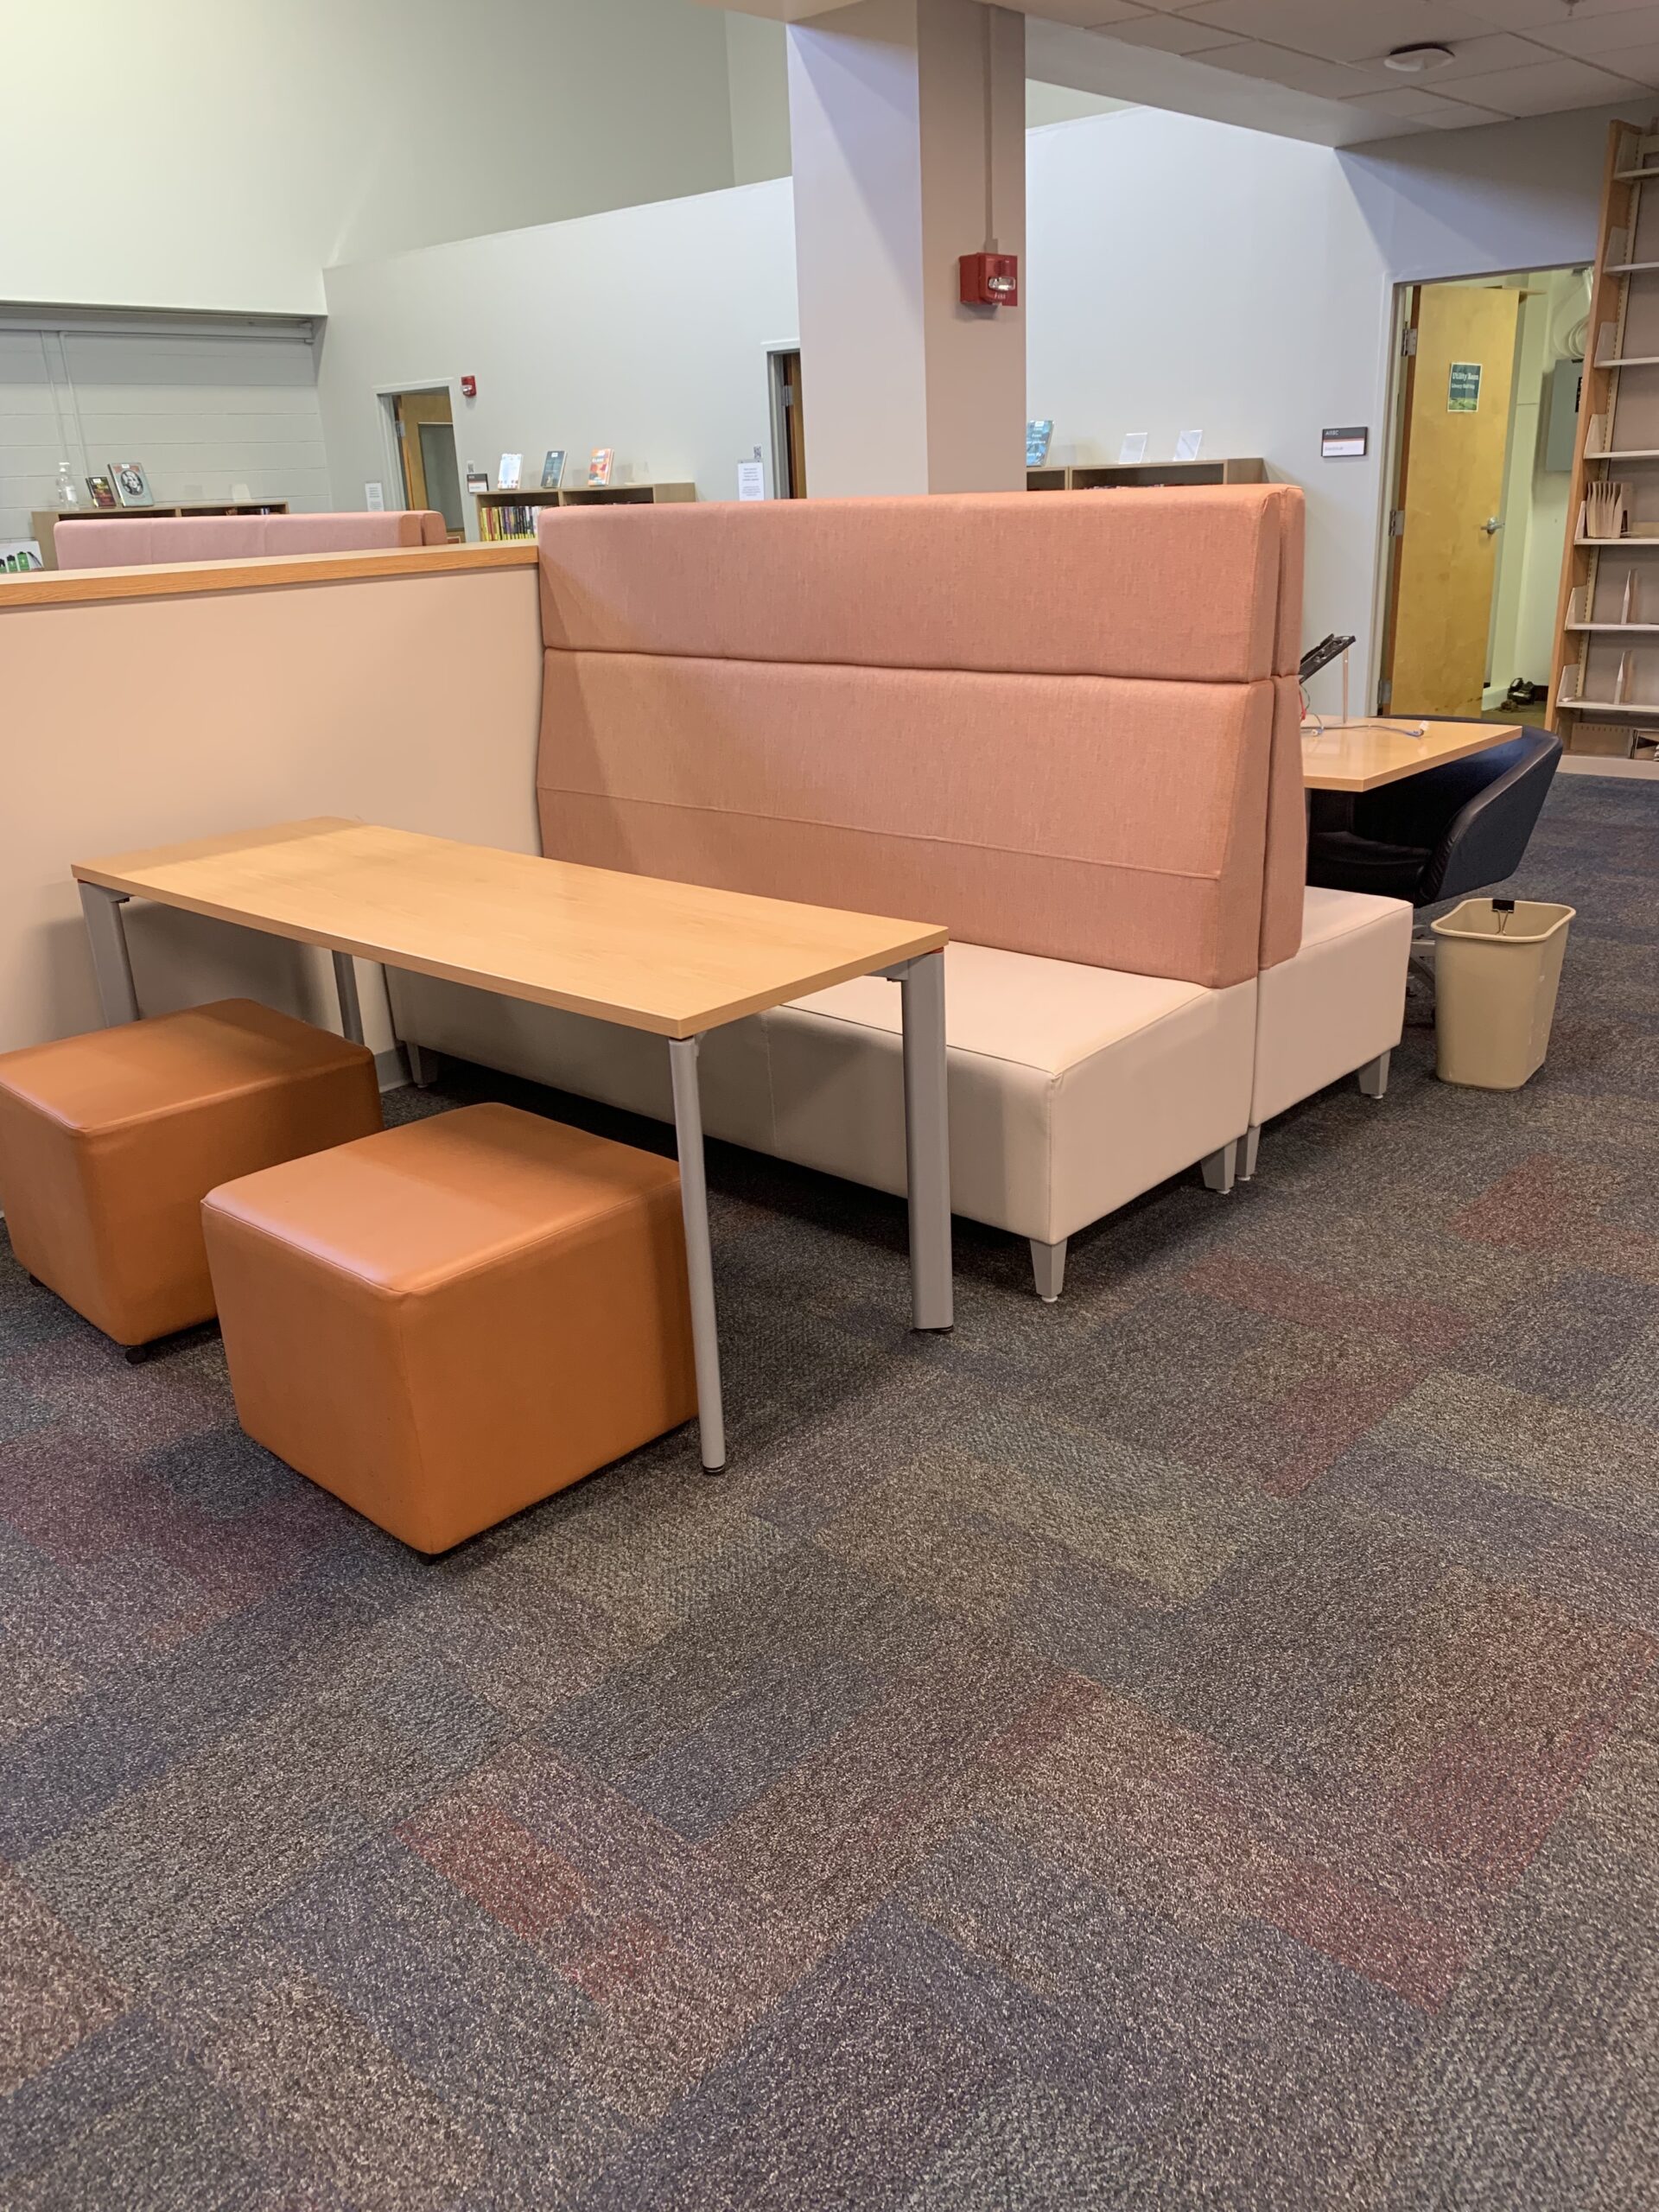 Rectangular table with lounge chairs and booth seating